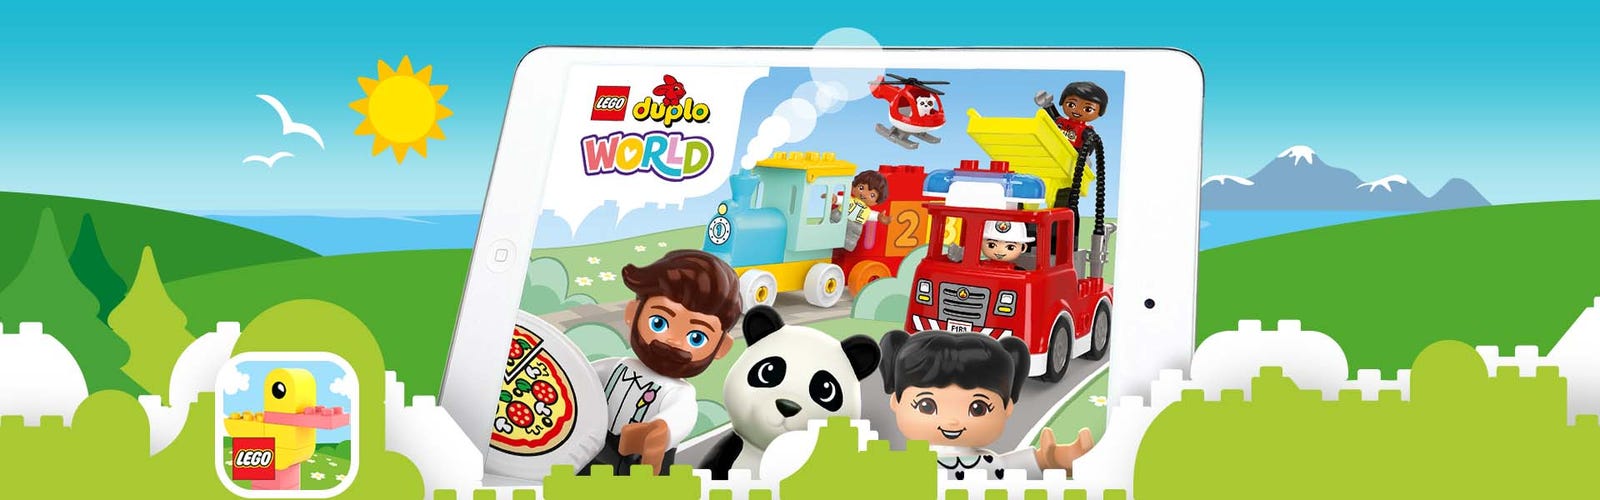 LEGO DUPLO WORLD - Welcome to the Amusement Park!